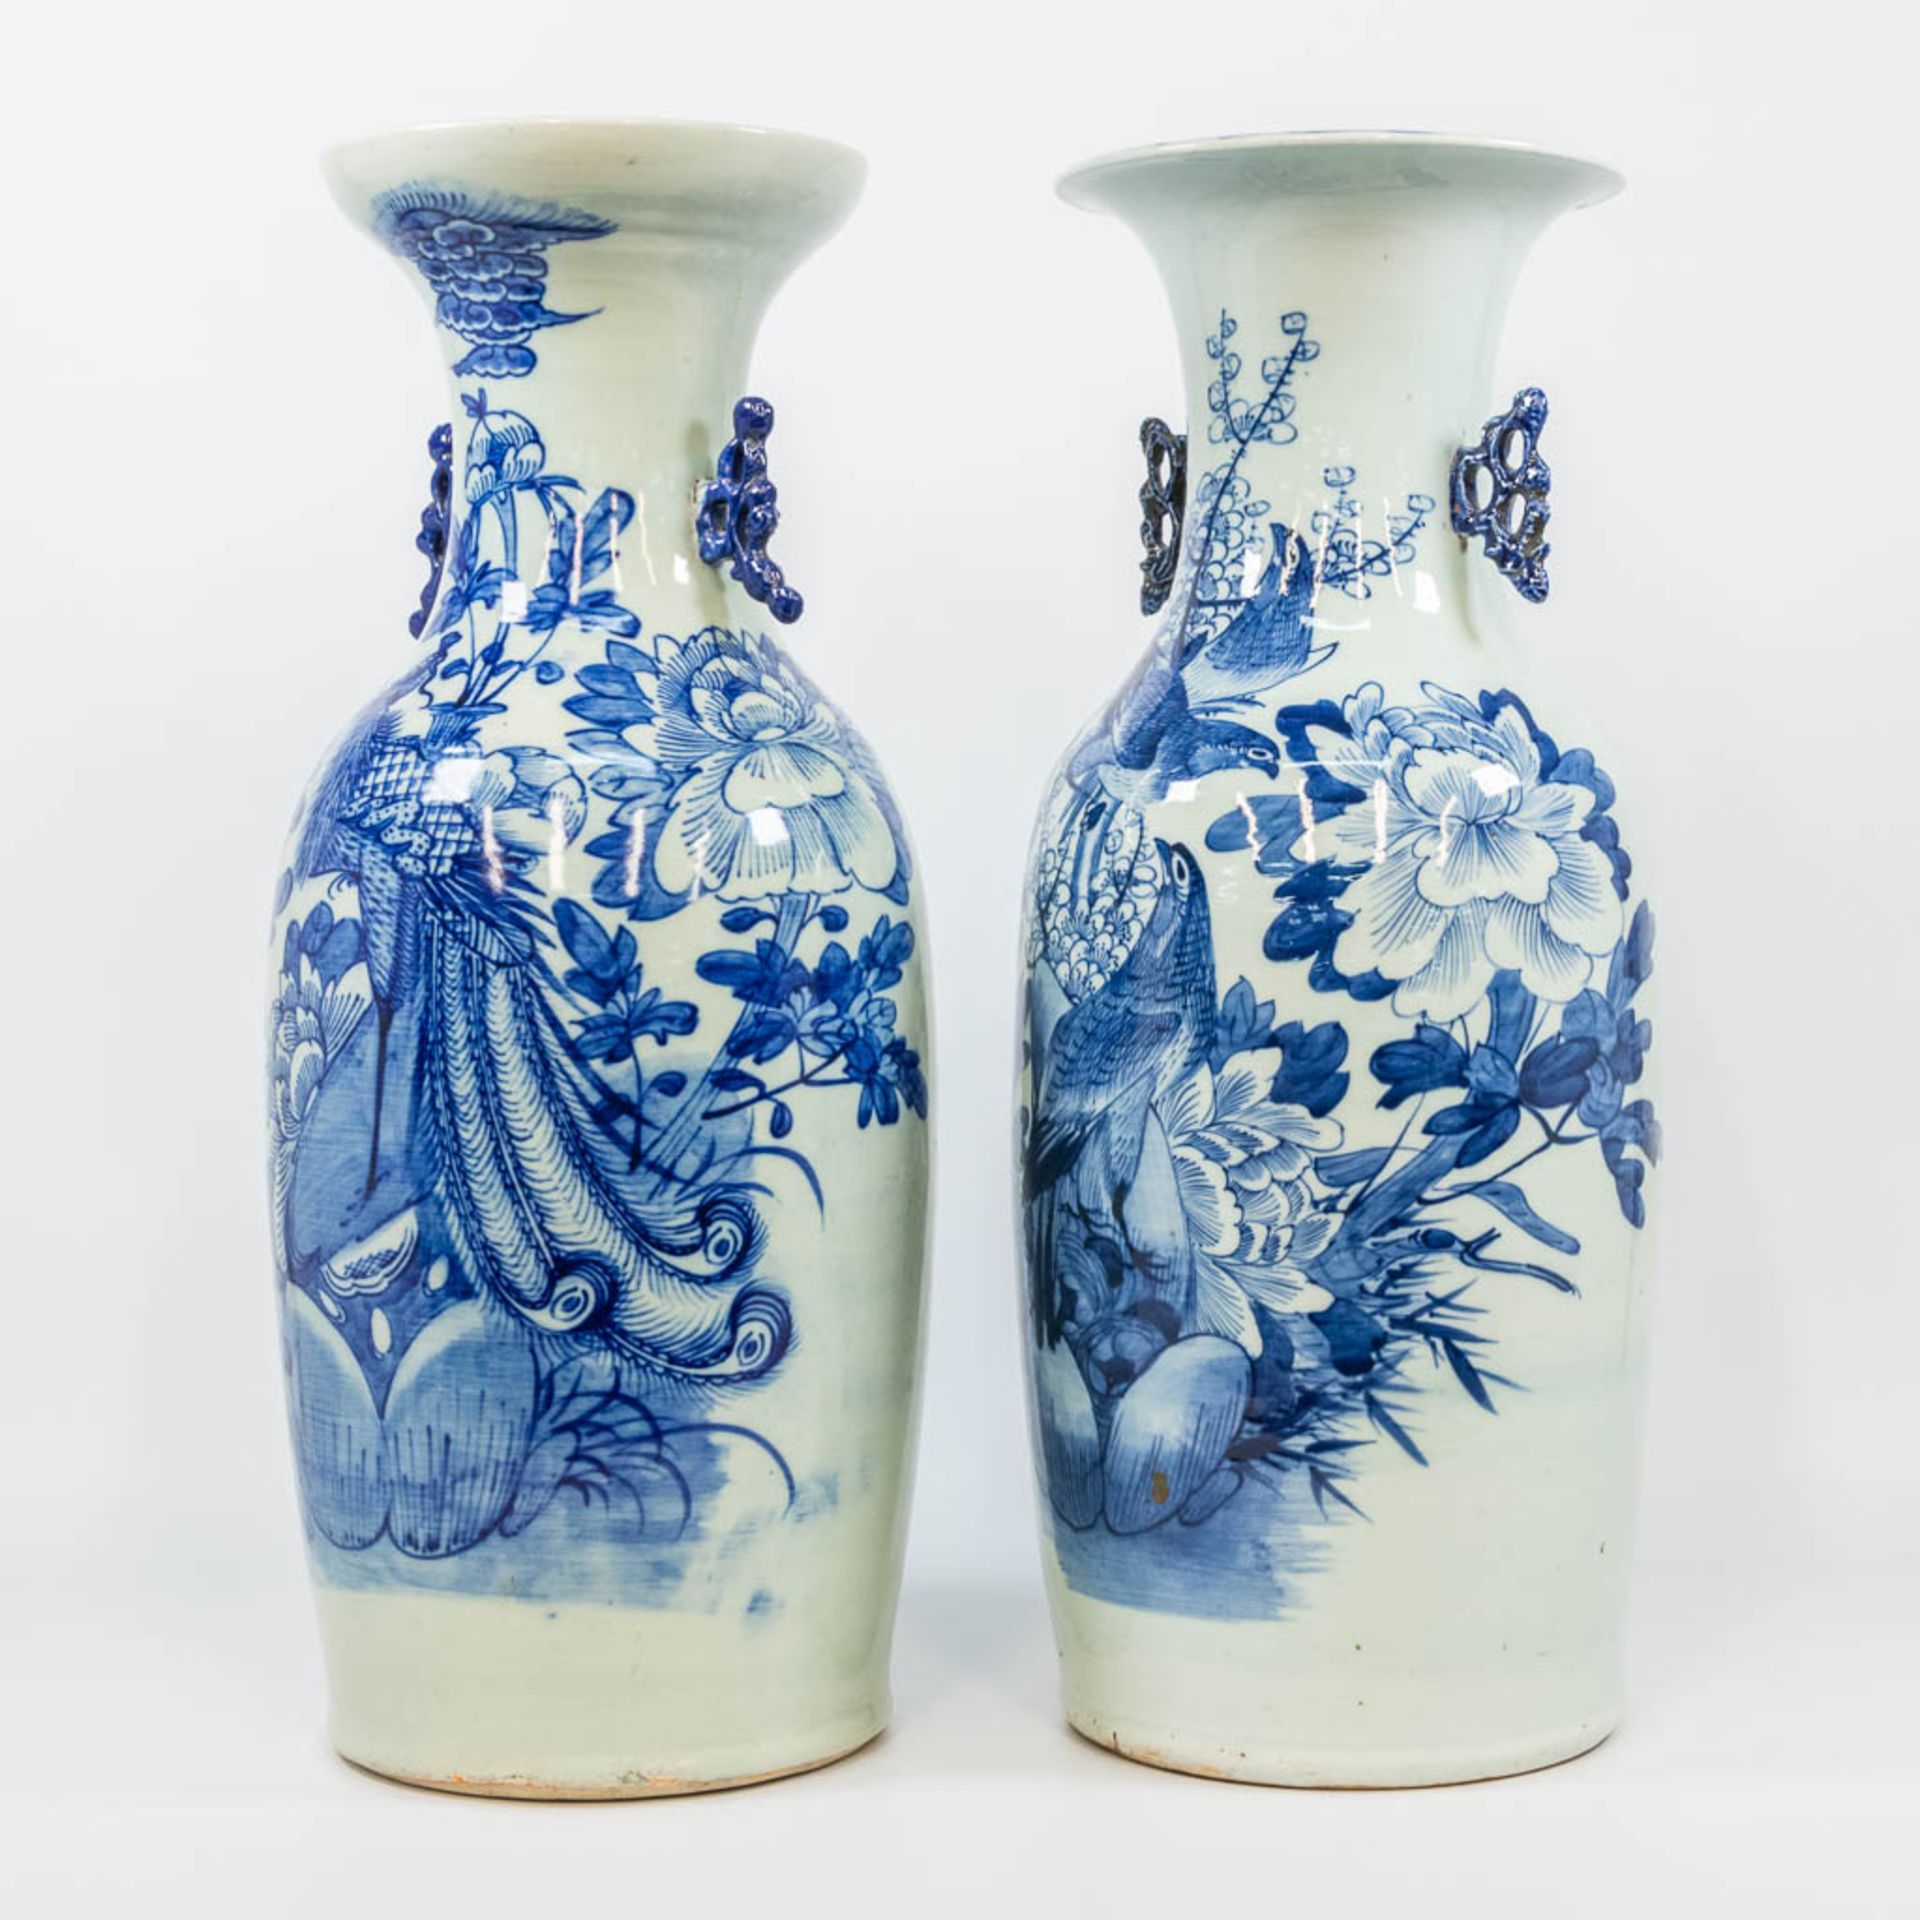 An assembled collection of 2 blue and white Chinese vases. 19th/20th century. (57 x 23 cm) - Bild 12 aus 19